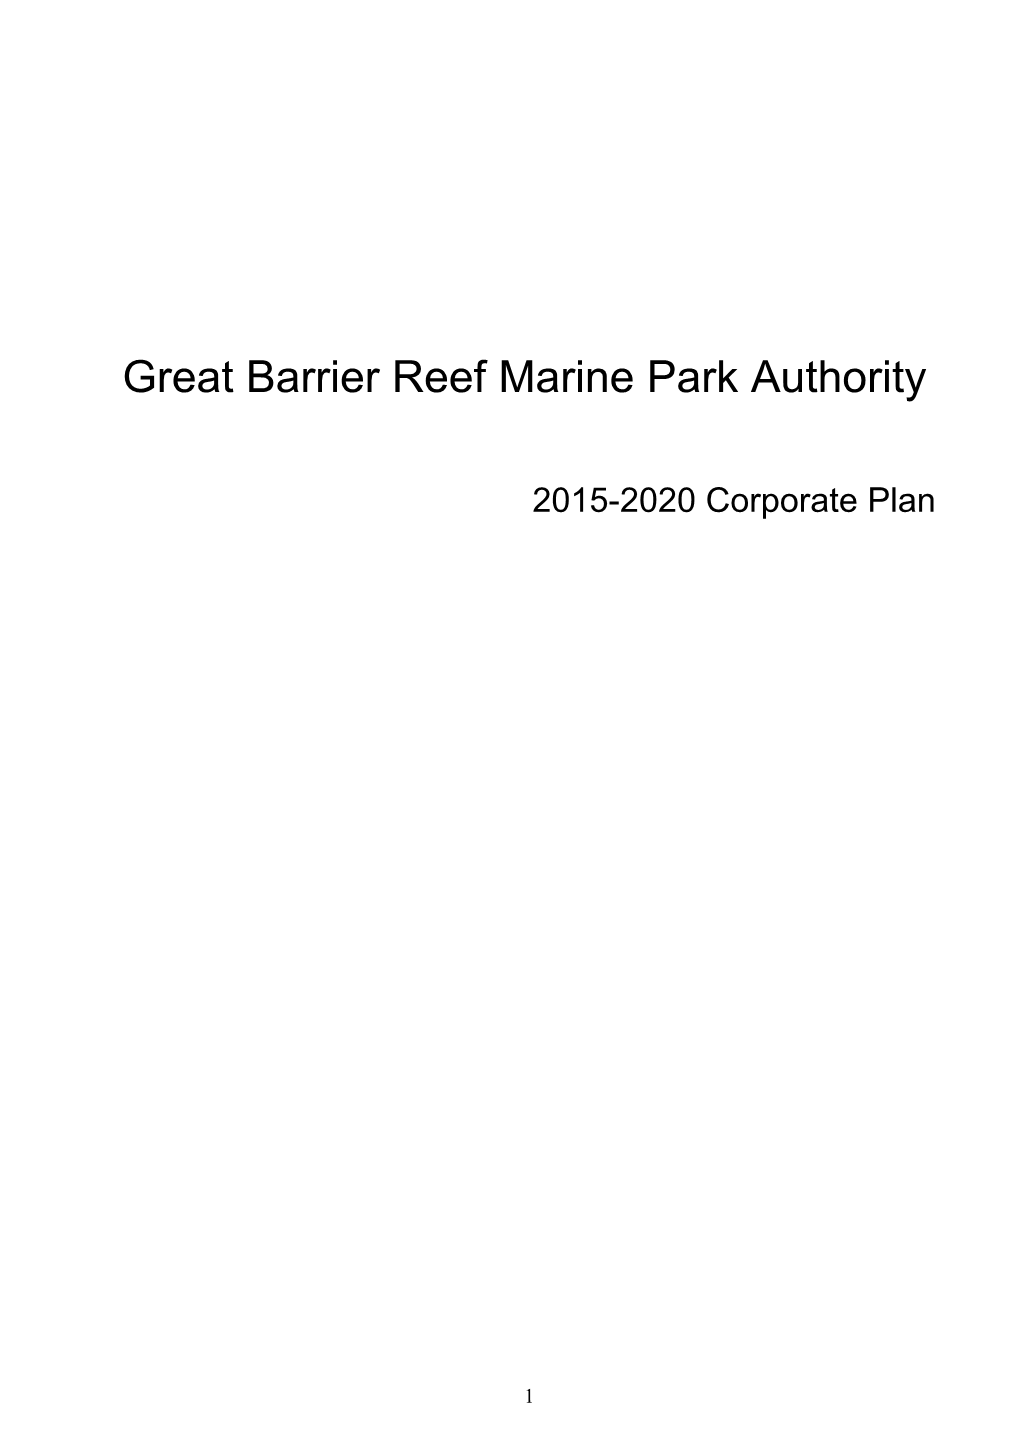 Corporate Plan Final 2015 - 2020 - Board Approved and Final